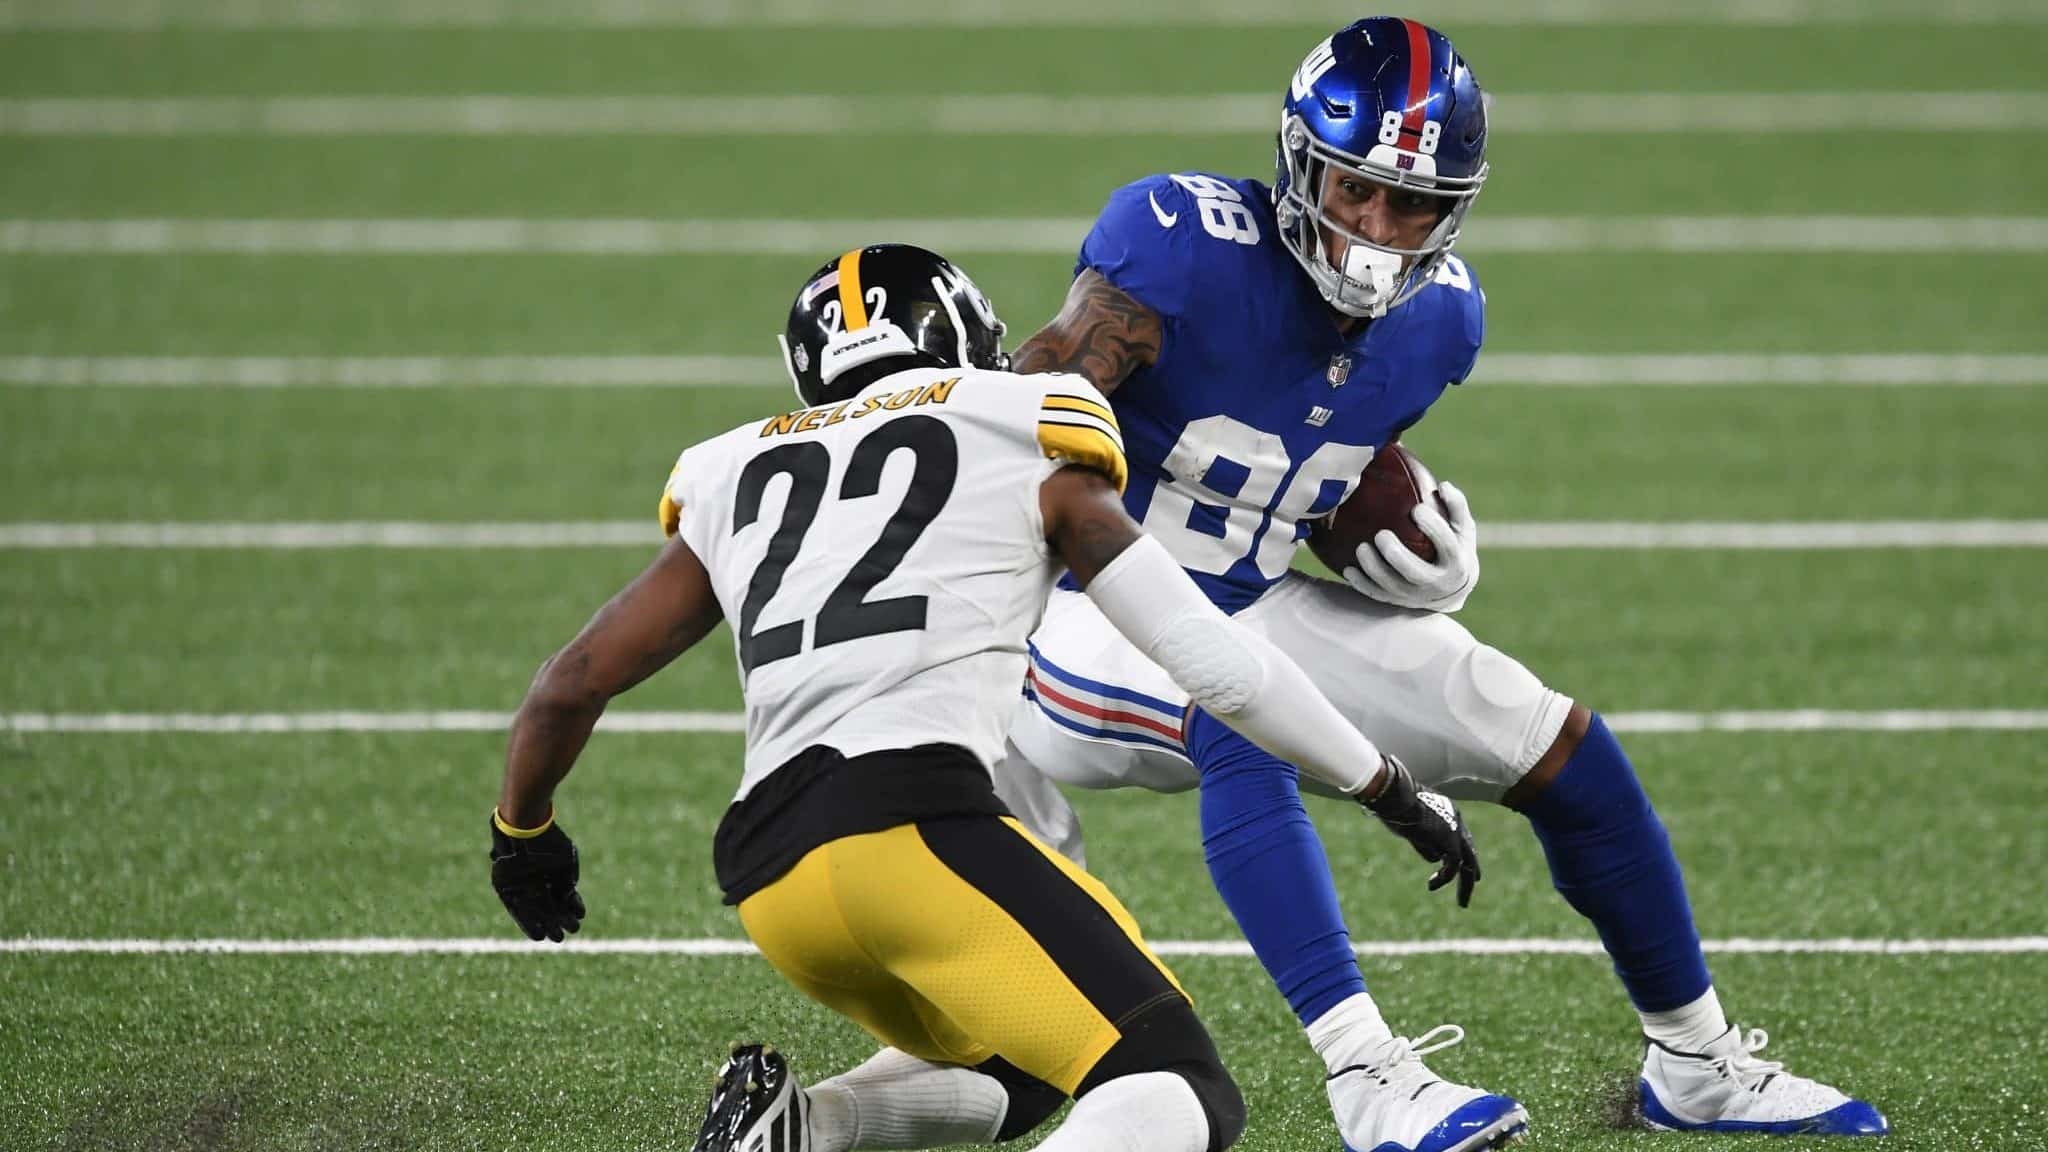 EAST RUTHERFORD, NEW JERSEY - SEPTEMBER 14: Evan Engram #88 of the New York Giants carries the ball as Steven Nelson #22 of the Pittsburgh Steelers defends during the second half at MetLife Stadium on September 14, 2020 in East Rutherford, New Jersey.